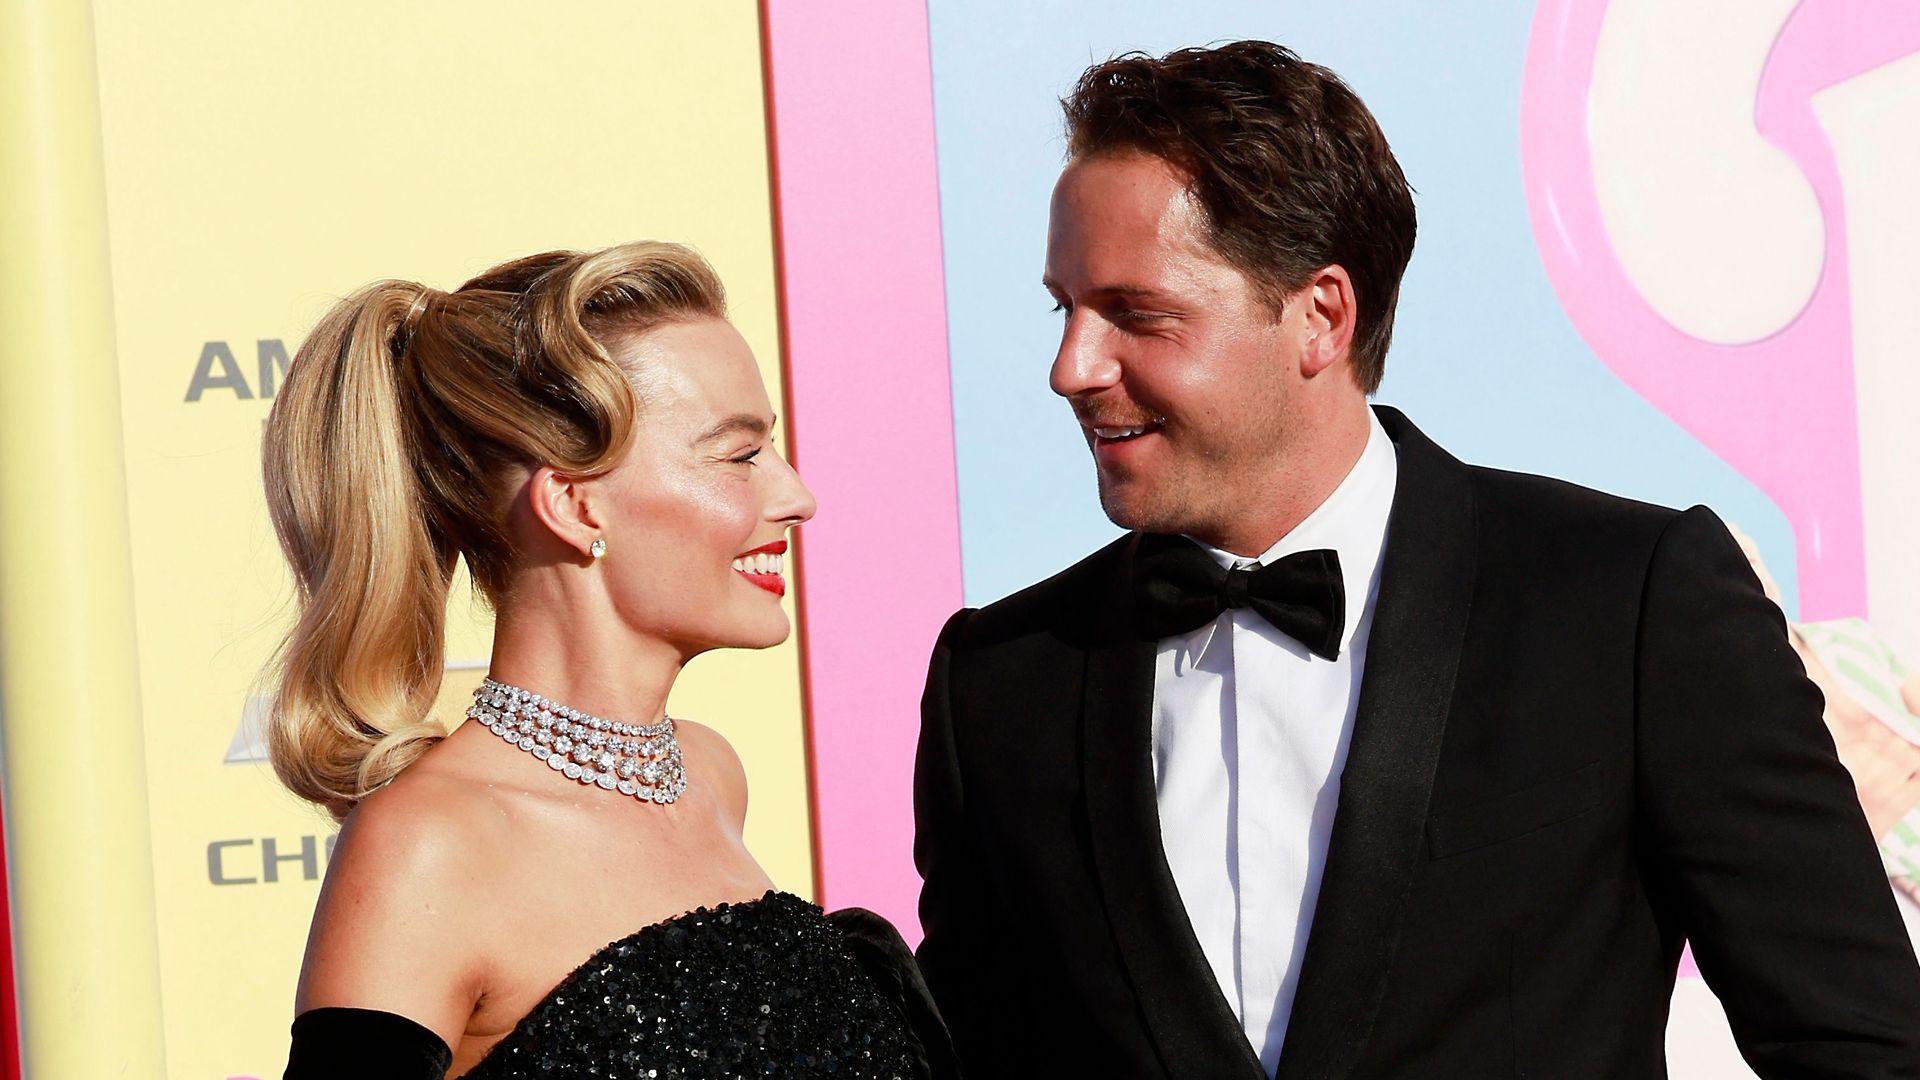 Australian actress Margot Robbie and her husband British producer Tom Ackerley arrive for the world premiere of "Barbie" at the Shrine Auditorium in Los Angeles